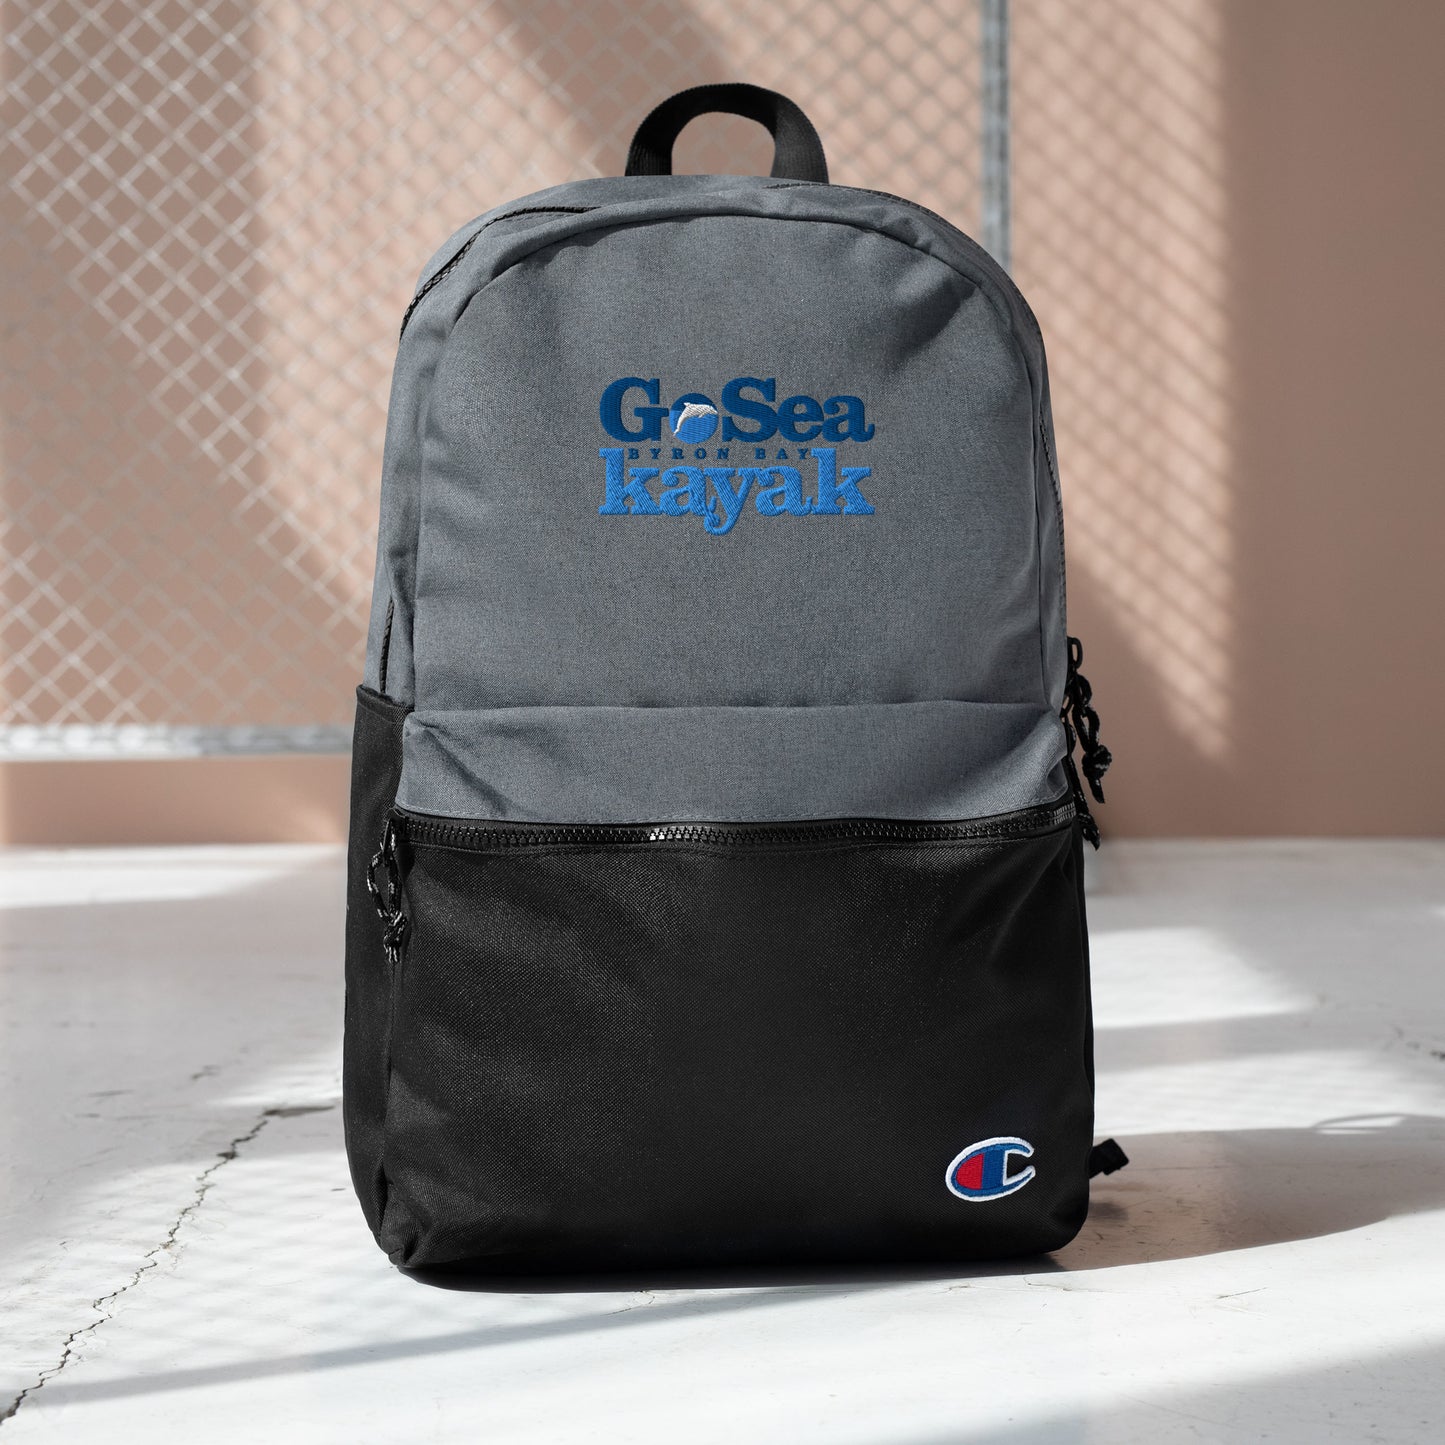  Champion Backpack - Grey and Black - Front view - Bag sitting on floor in front of fence - With Go Sea Kayak Byron Bay logo on front  - Genuine Byron Bay Merchandise | Produced by Go Sea Kayak Byron Bay 